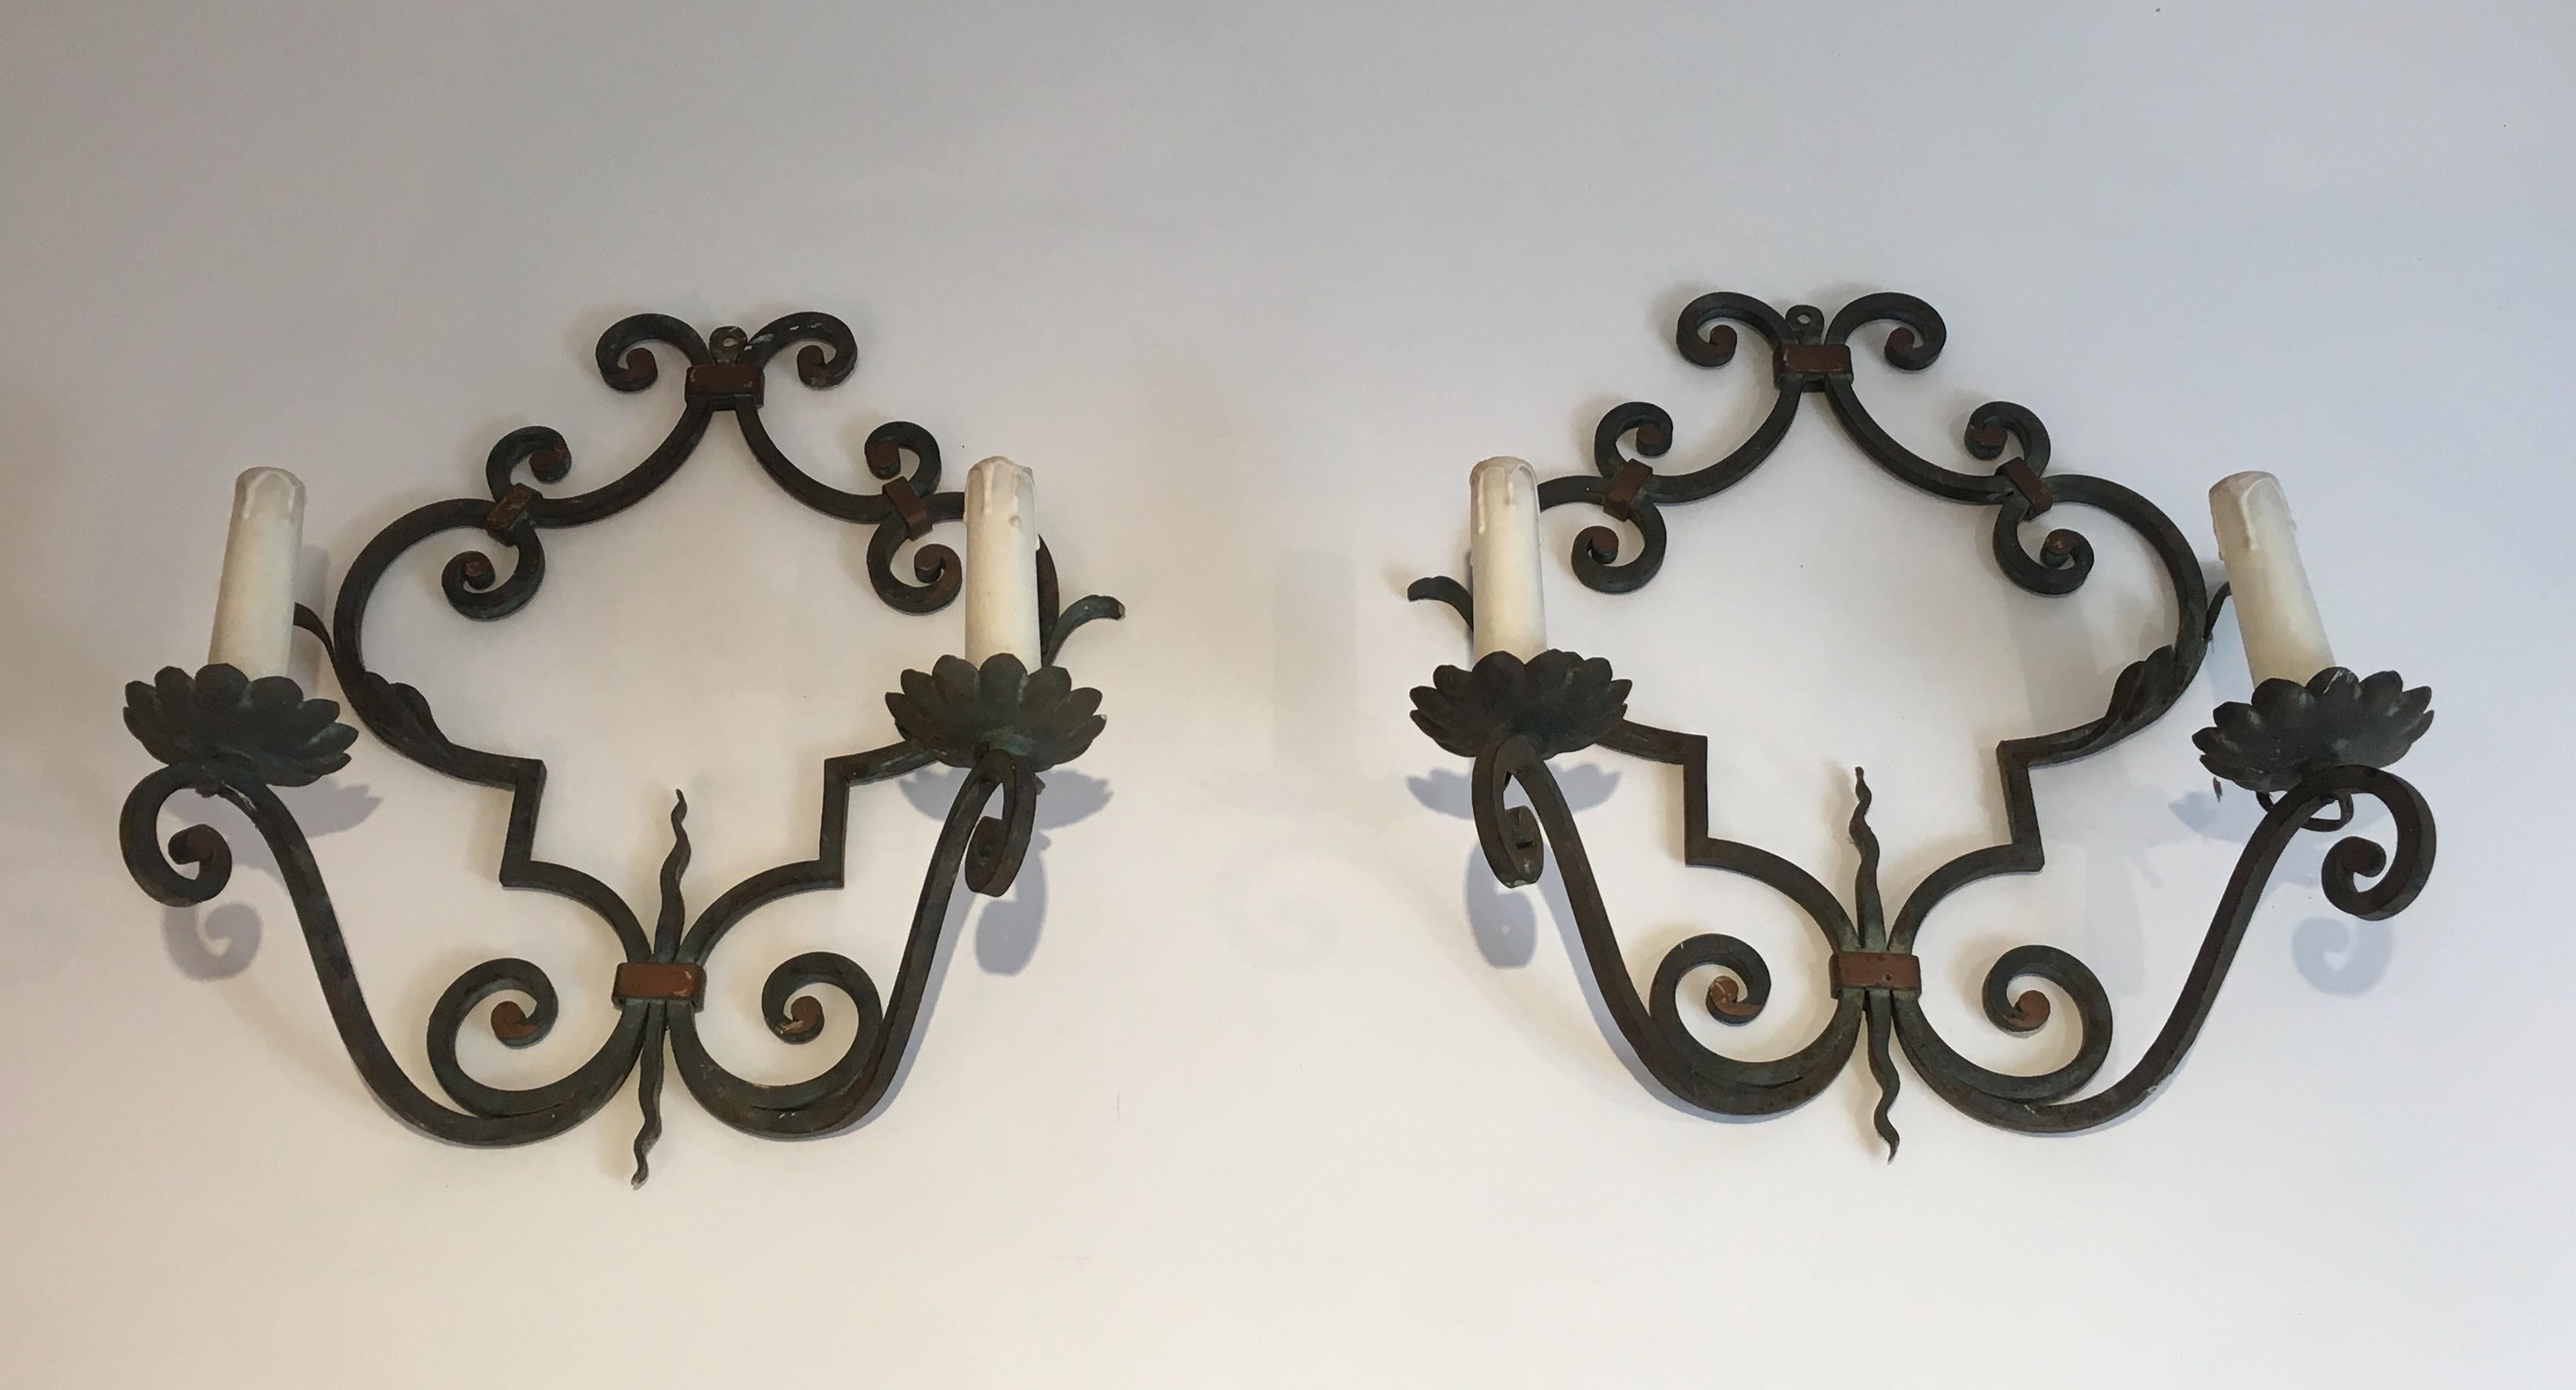 Pair of Large Decorative Wrought Iron Wall Sconces, French, circa 1950 For Sale 1